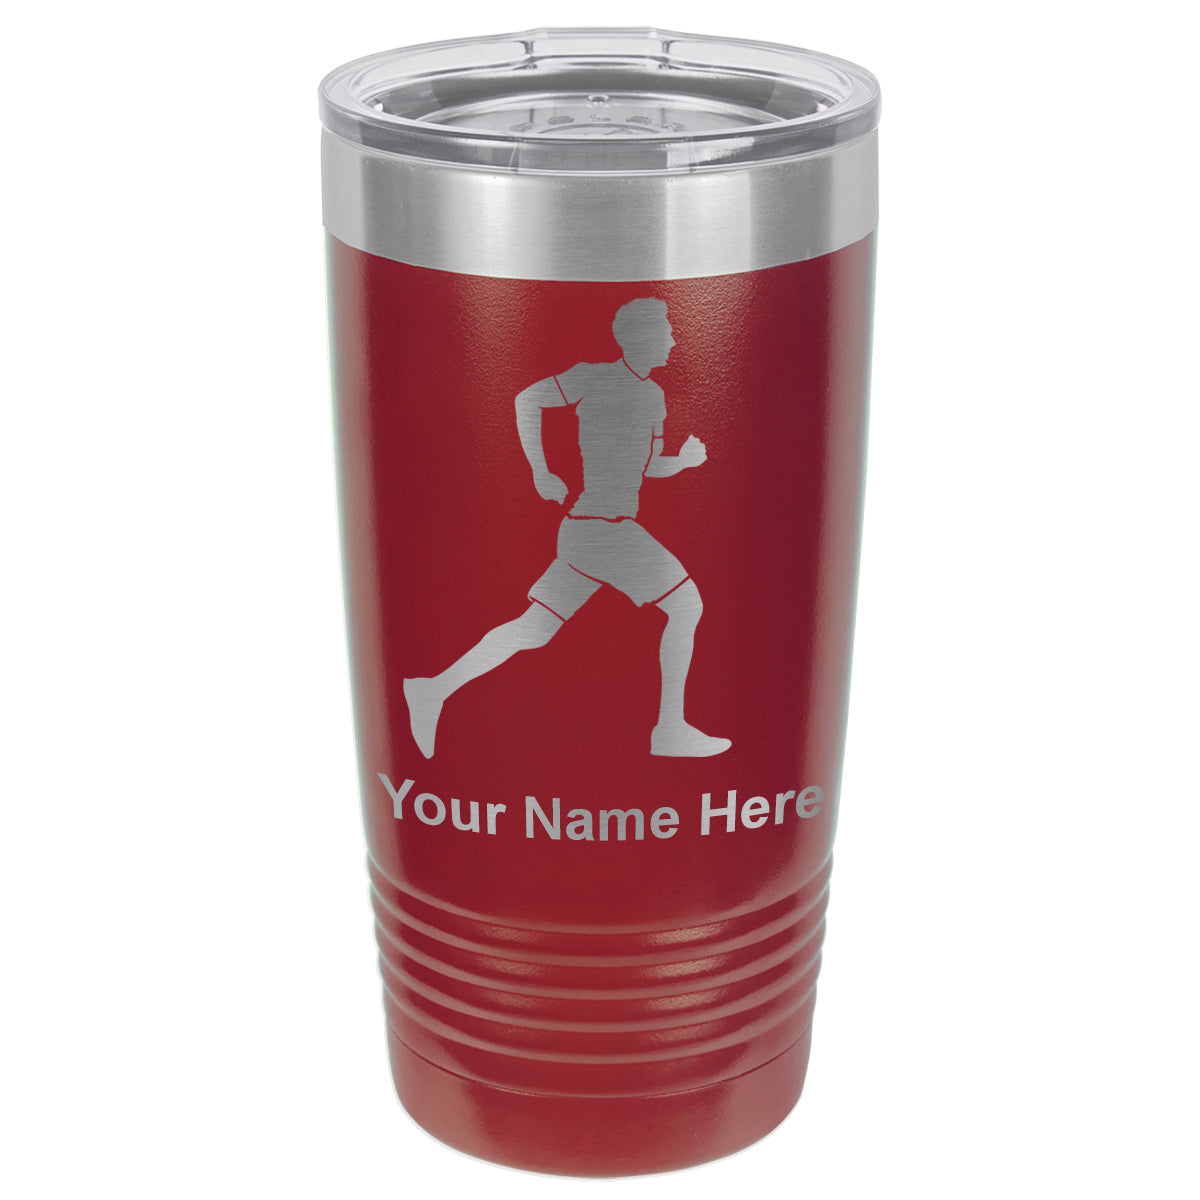 20oz Vacuum Insulated Tumbler Mug, Running Man, Personalized Engraving Included